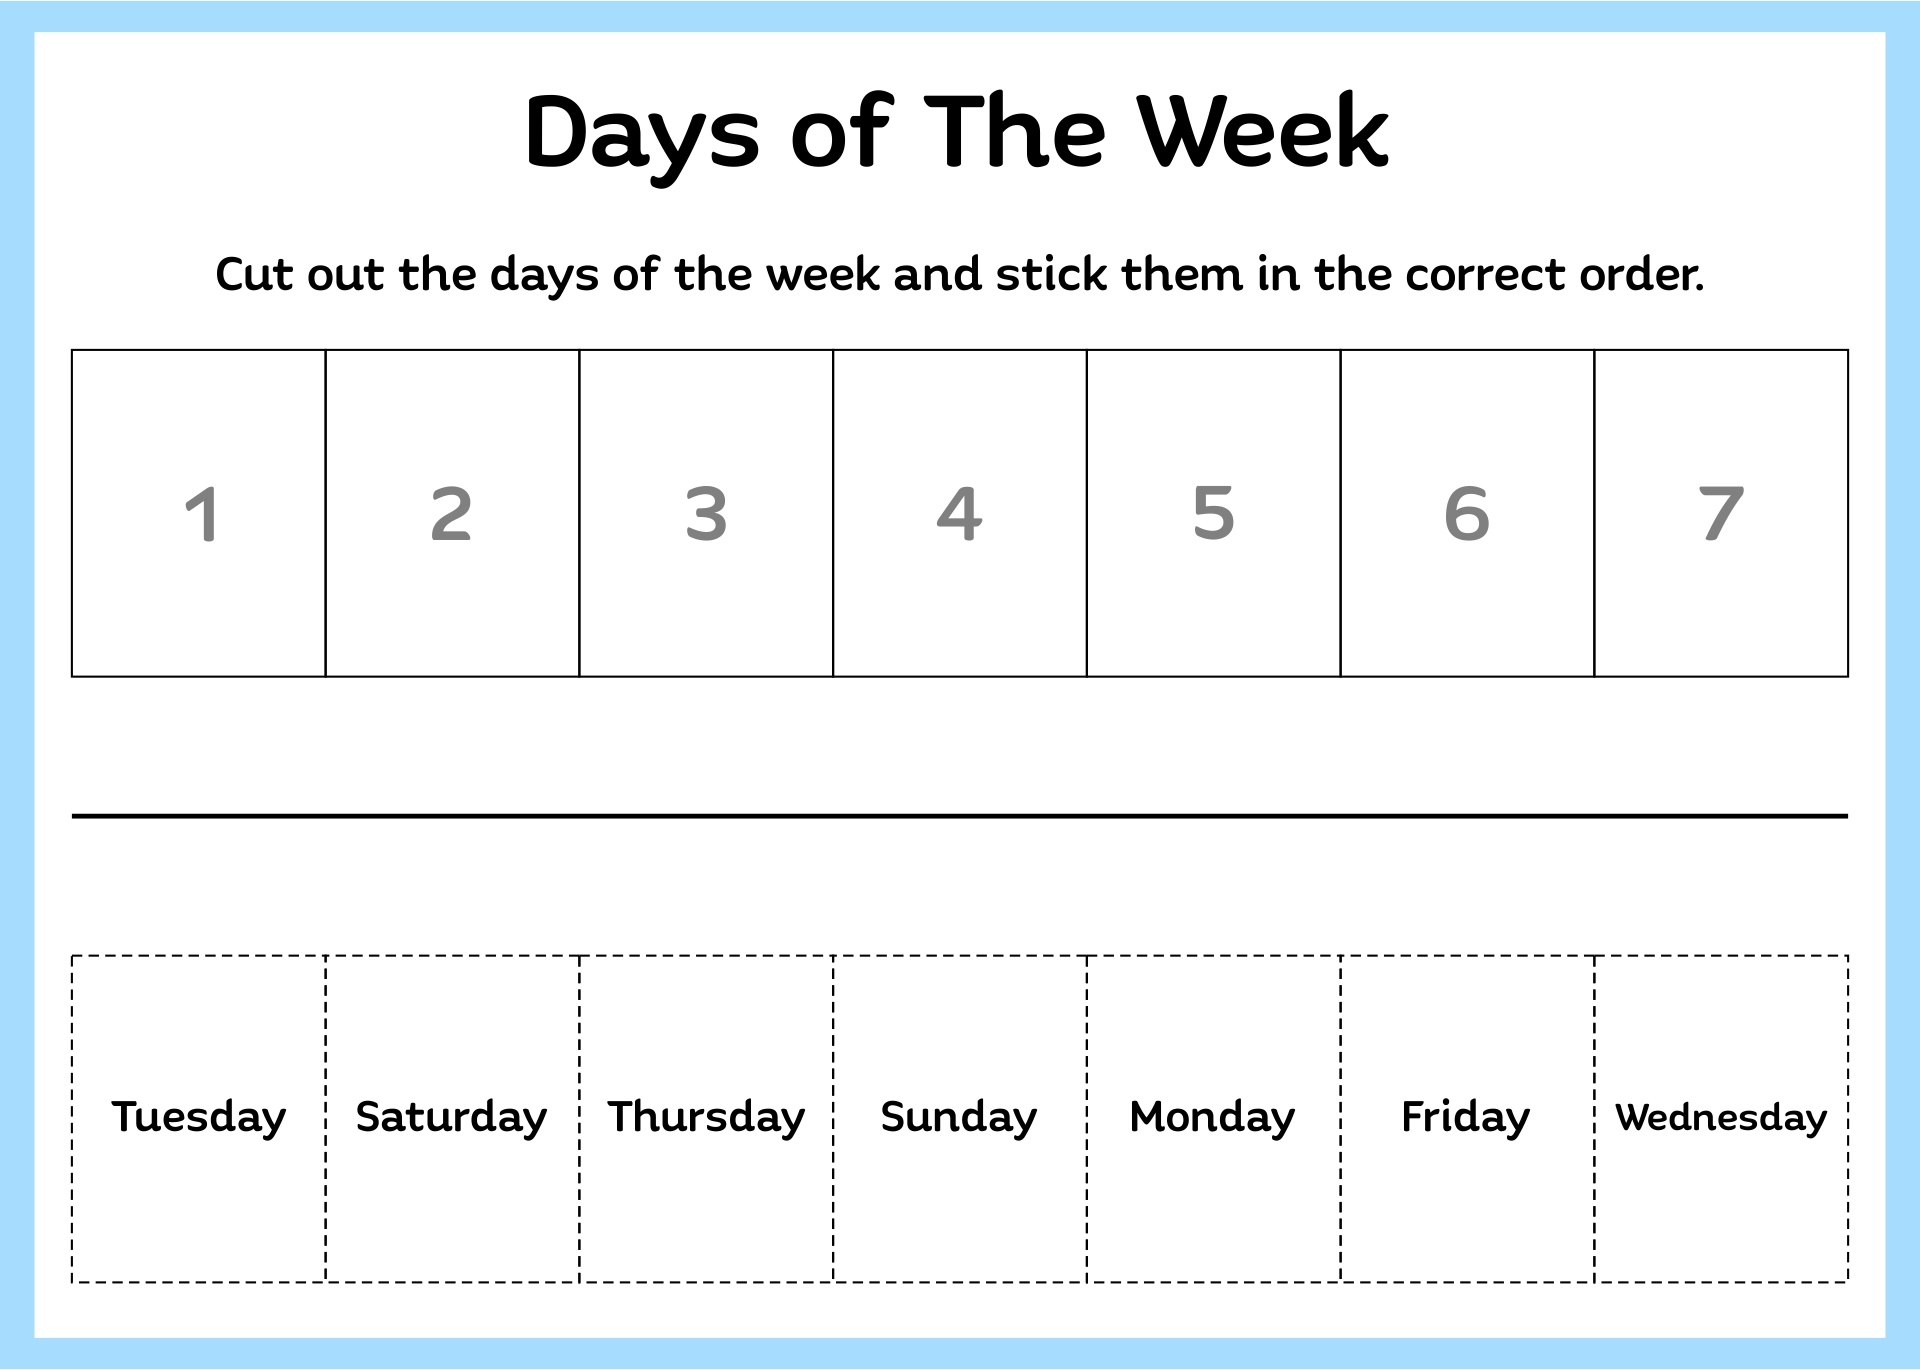 9-best-images-of-printable-days-of-the-week-train-days-of-the-week